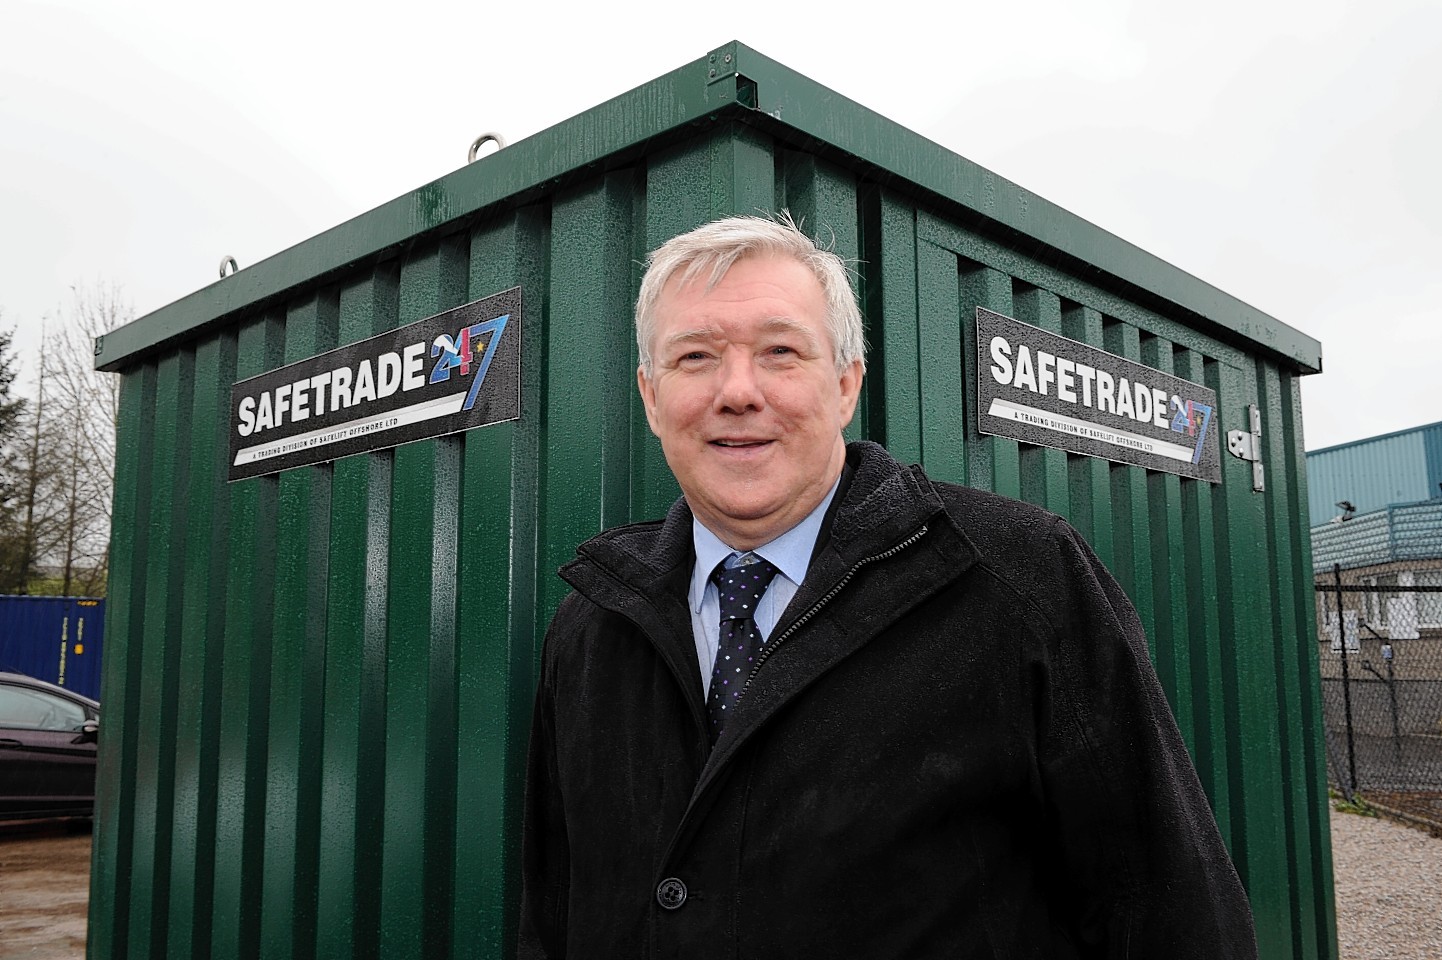 Bill Cheyne, Commercial Development Manager of SafeTrade 247